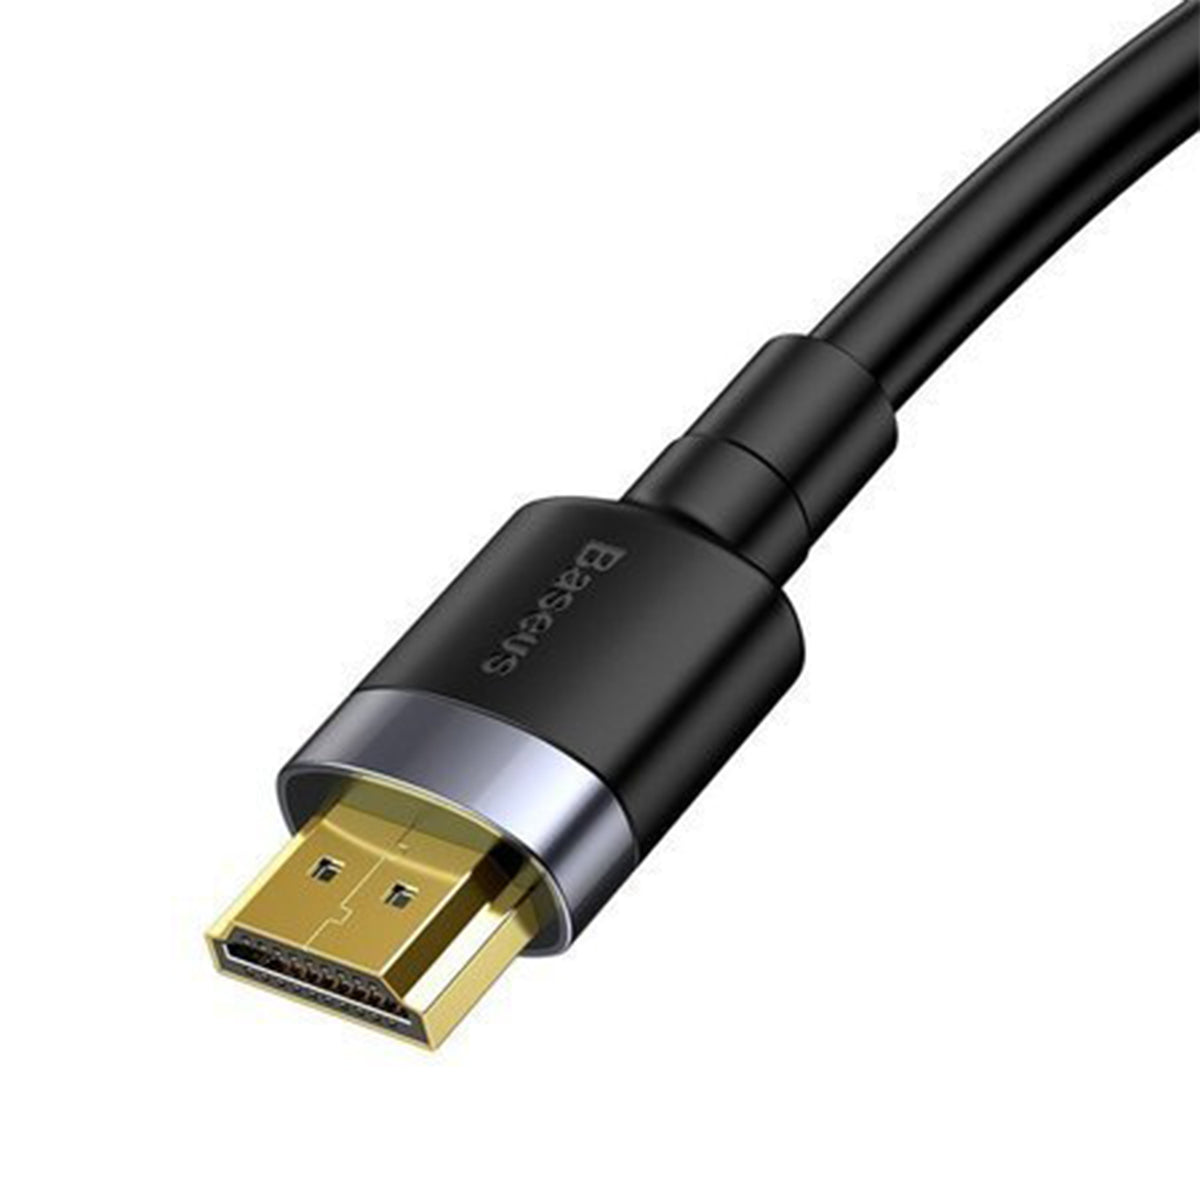 Baseus Cafule 4K HDMI Male To 4K HDMI Male Adapter Cable